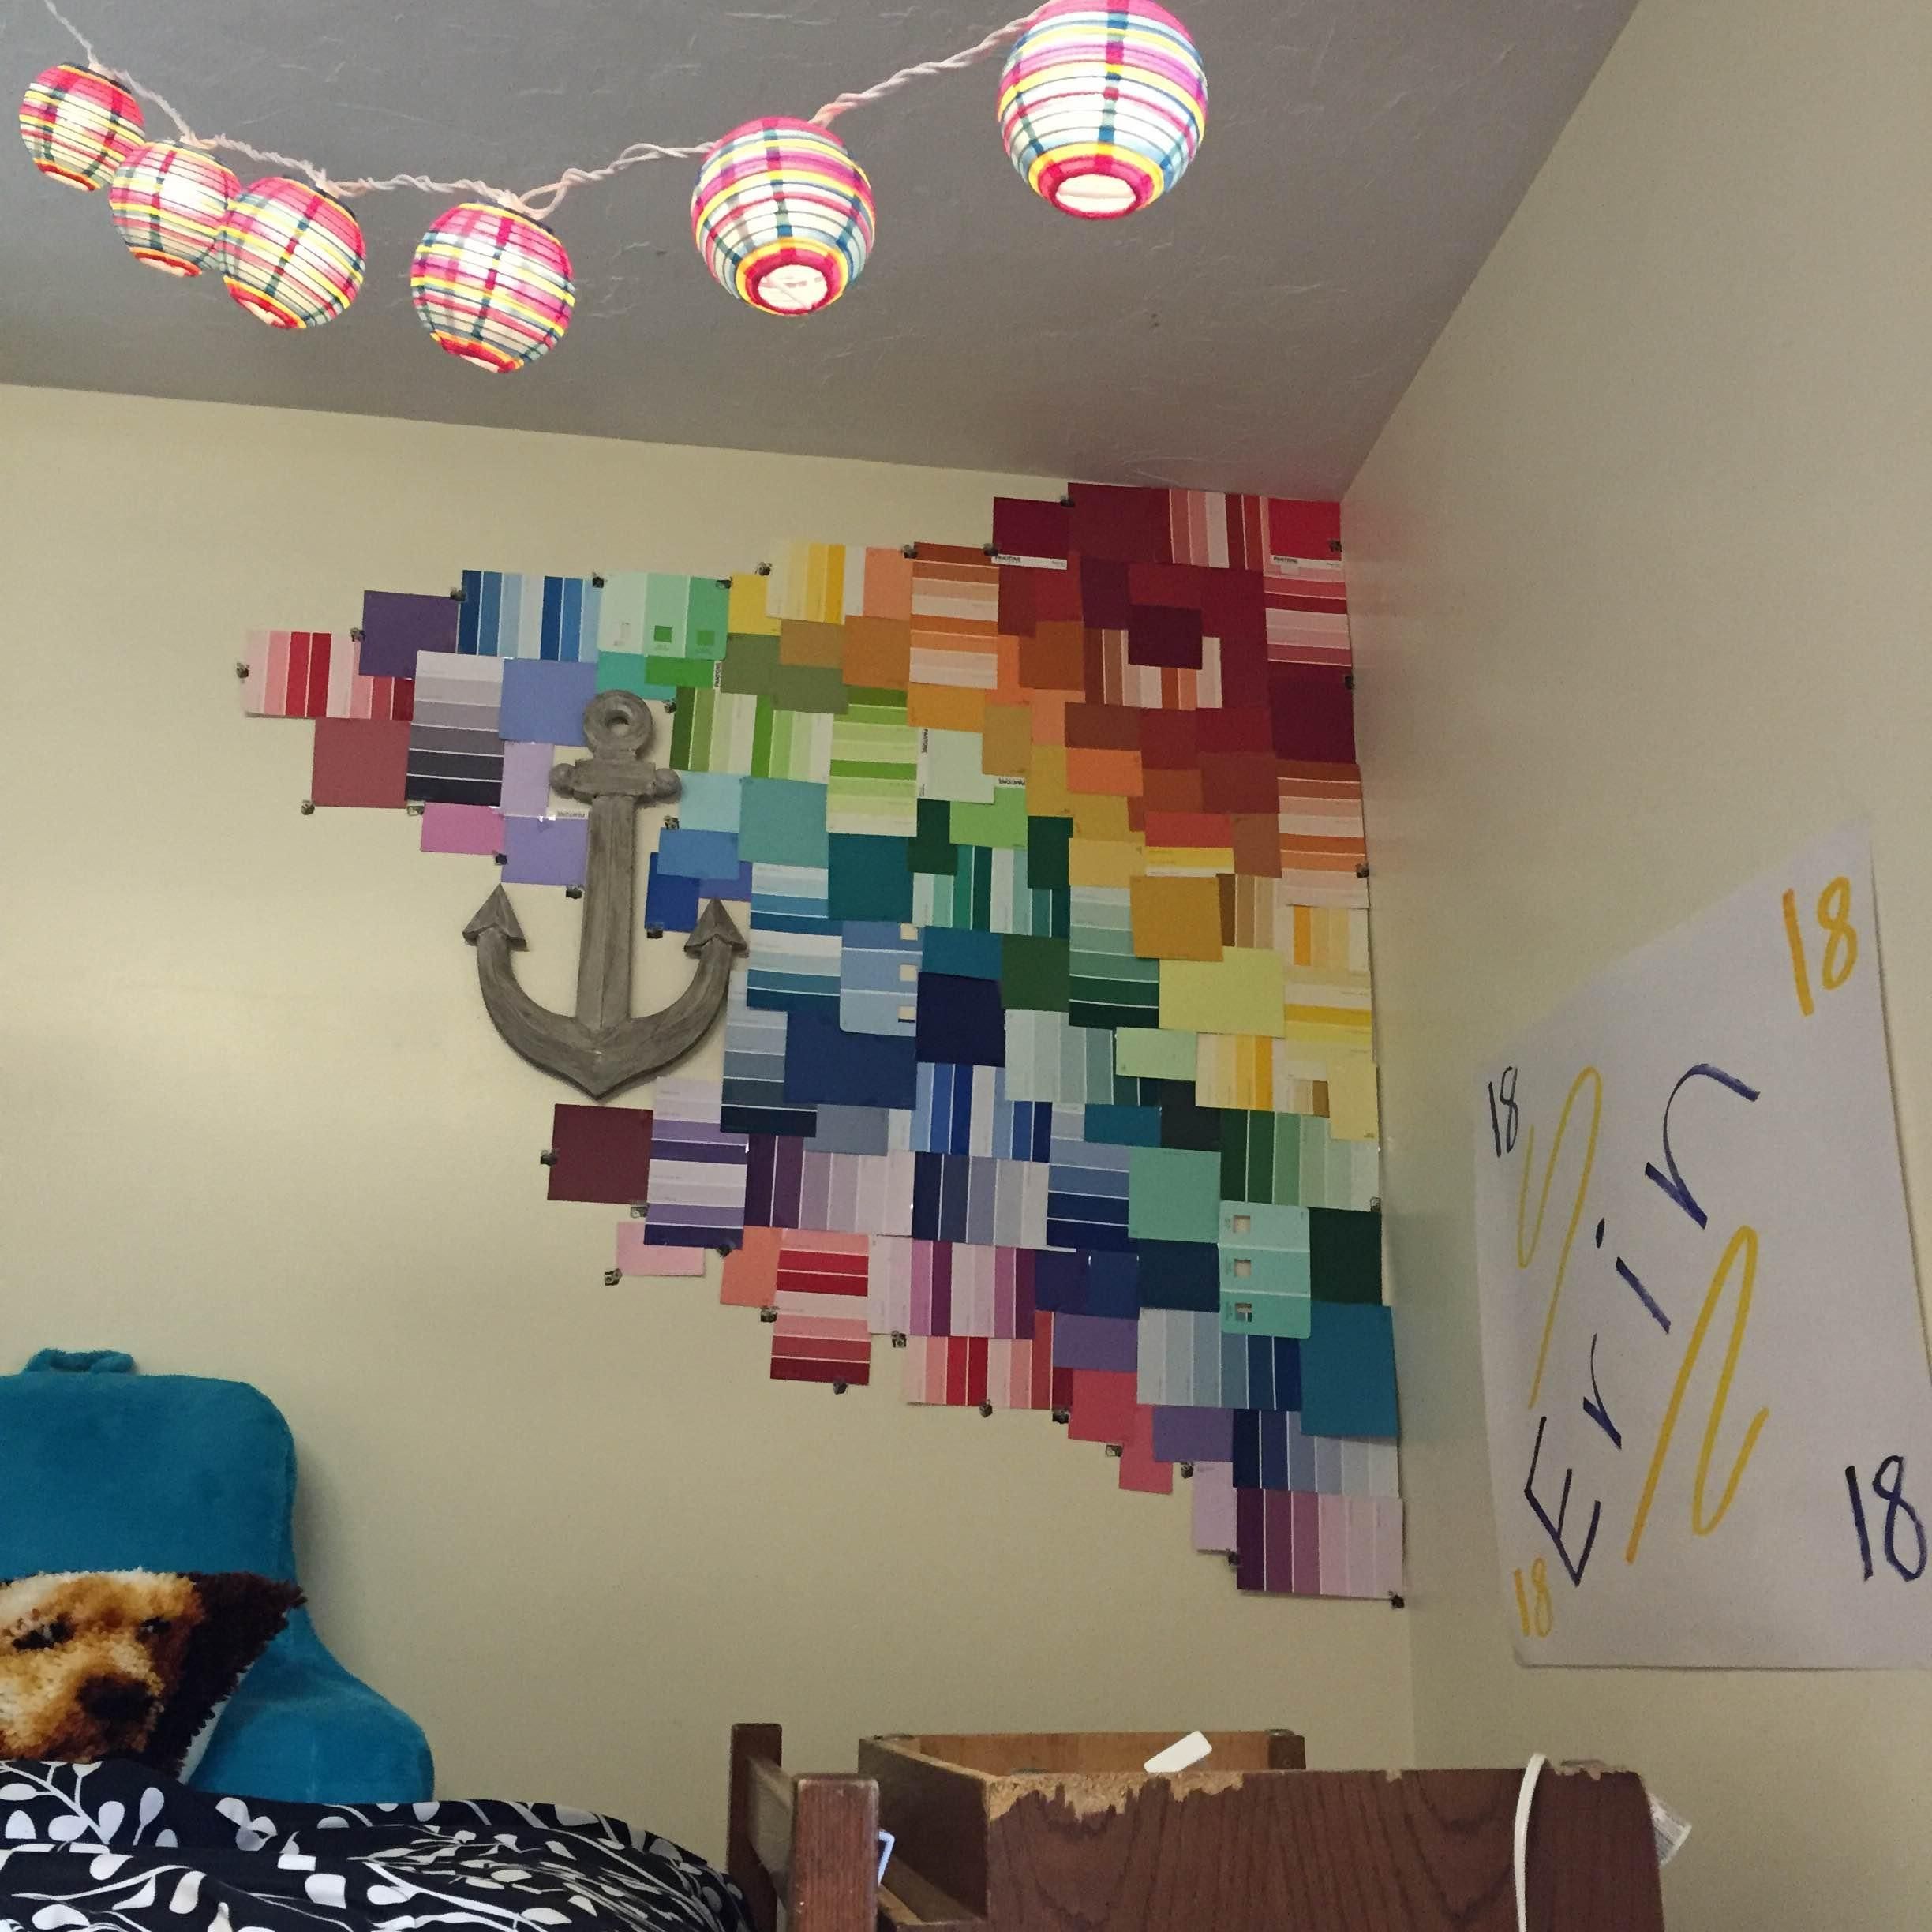 Dorm – Life In Orange And Blue | Hope College Intended For Wall Art For College Dorms (View 10 of 20)